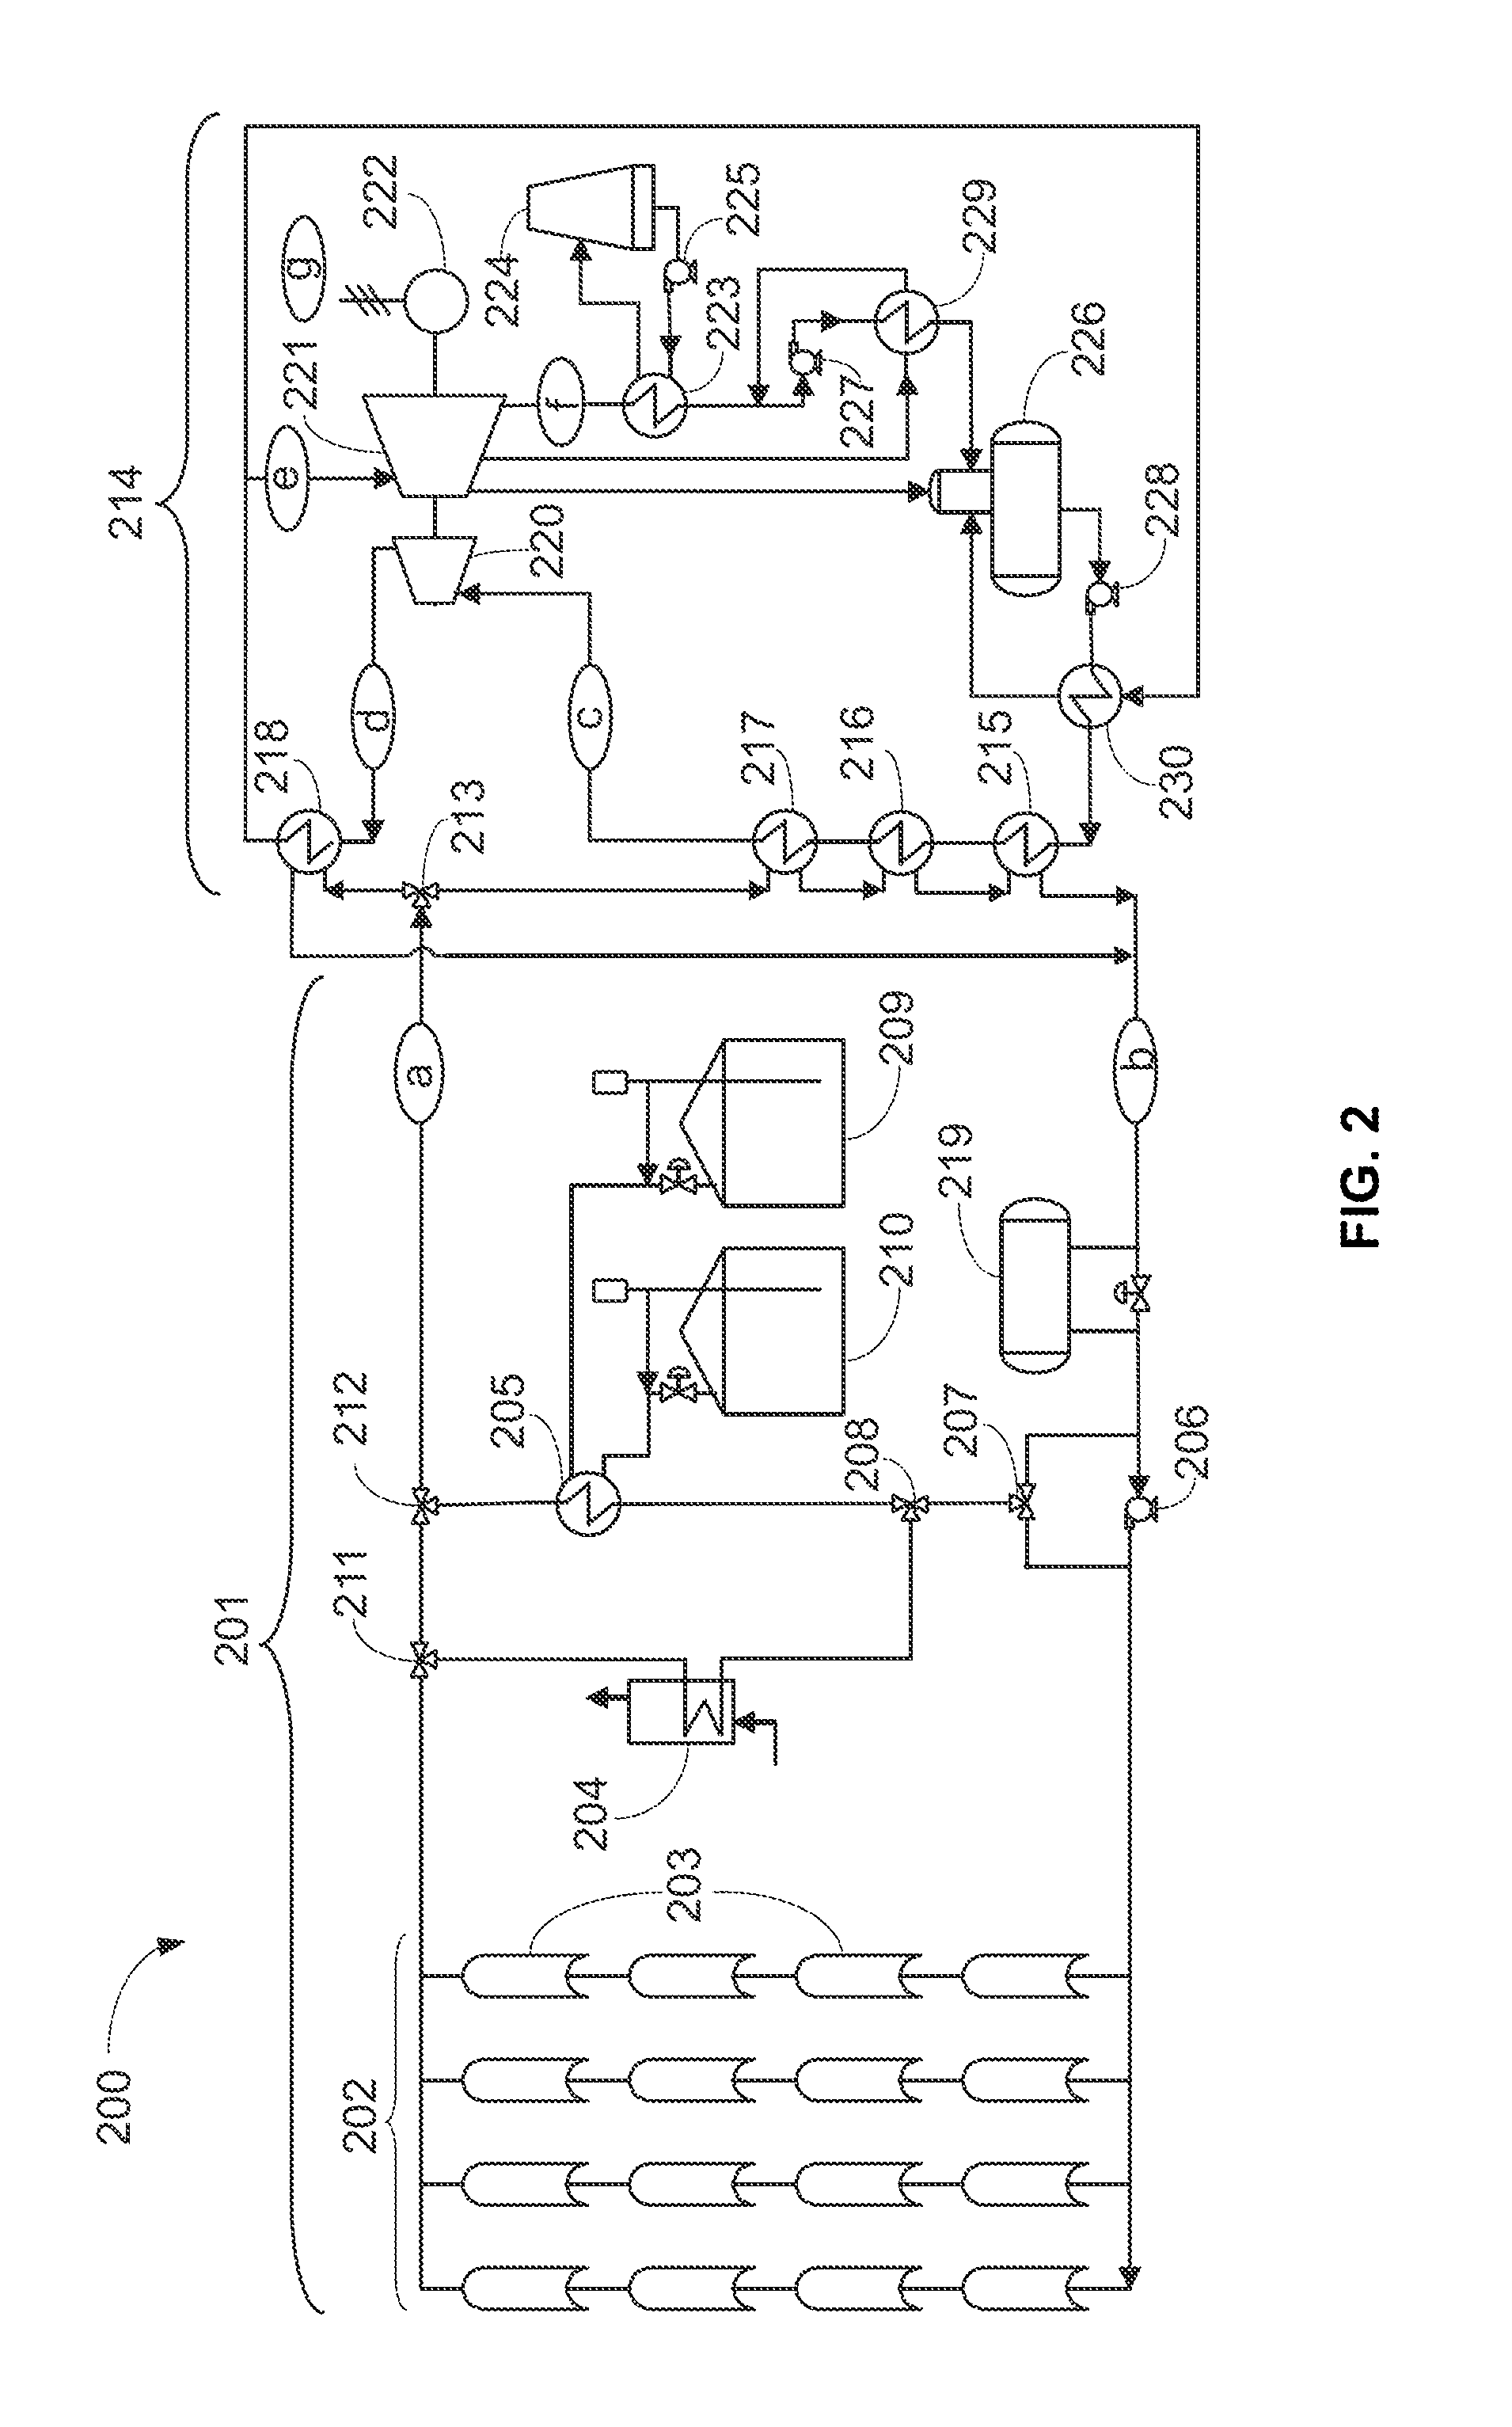 Process for Producing Superheated Steam from a Concentrating Solar Power Plant